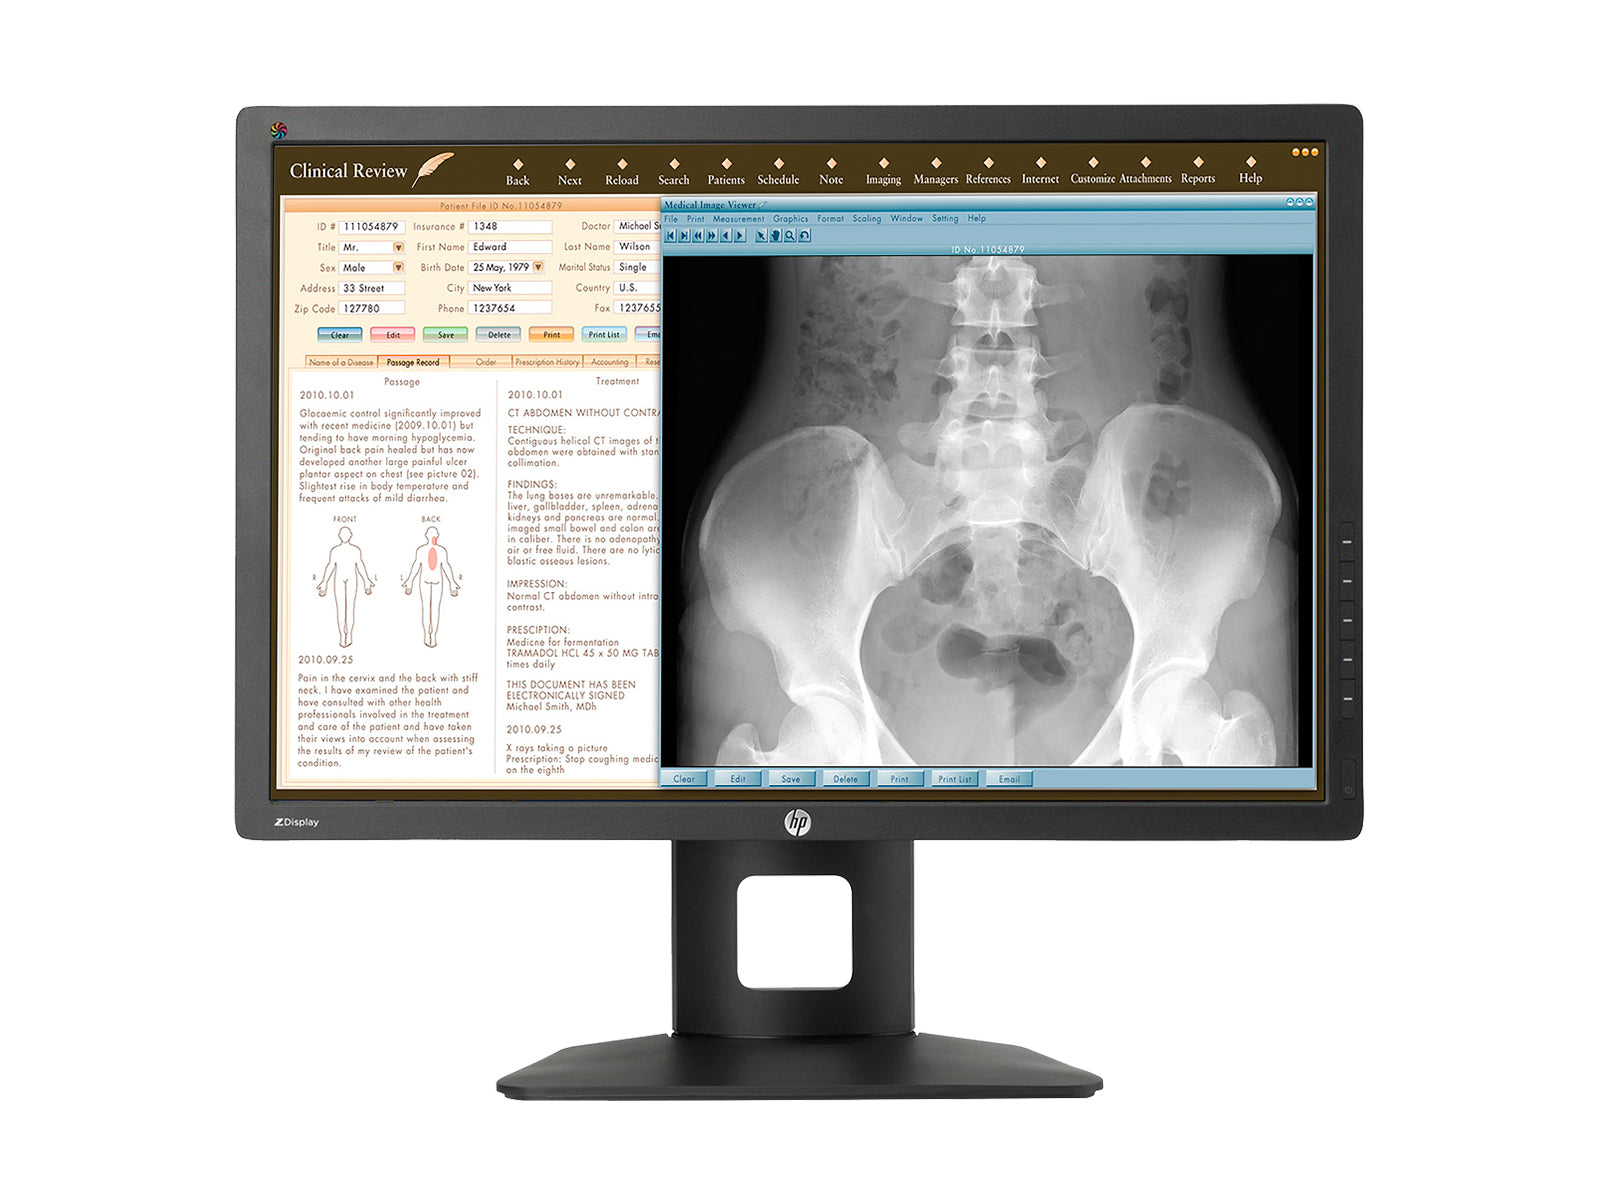 Complete PACS General Radiology Station | Barco 3MP Grayscale LED Displays | Lenovo Workstation